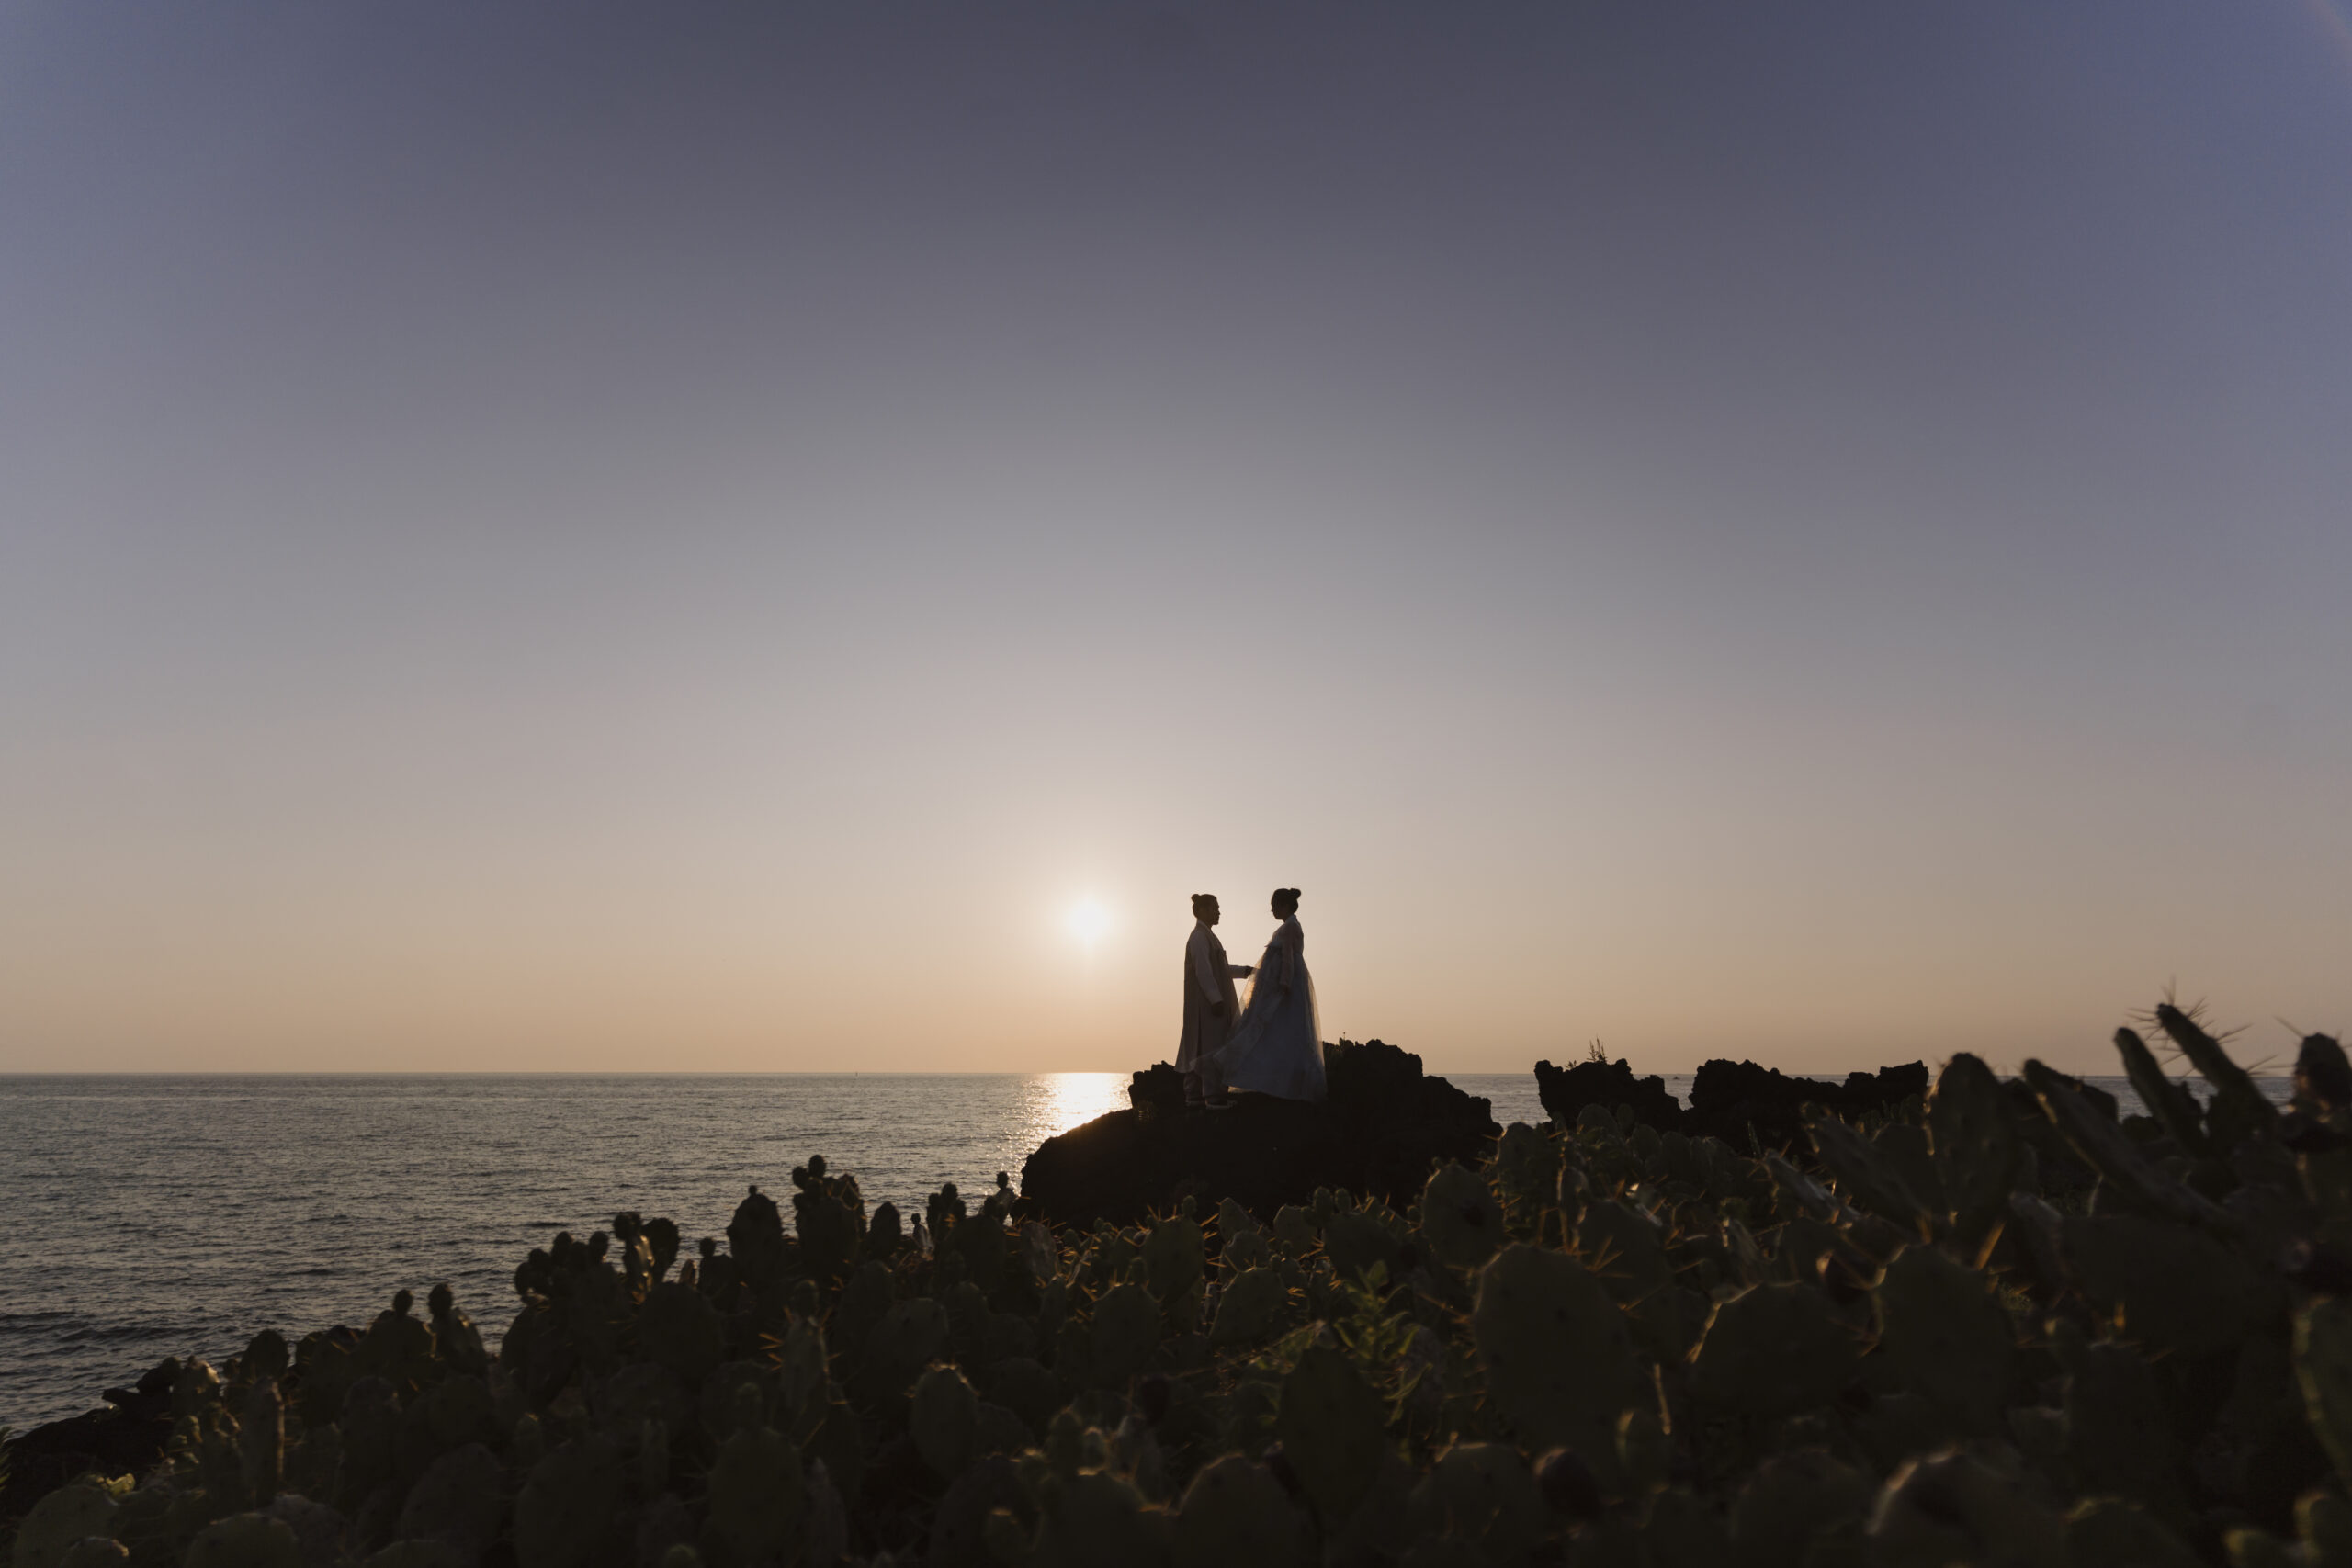 A couple stands on a cliff admiring the oceanic view in Korea's stunning weather.